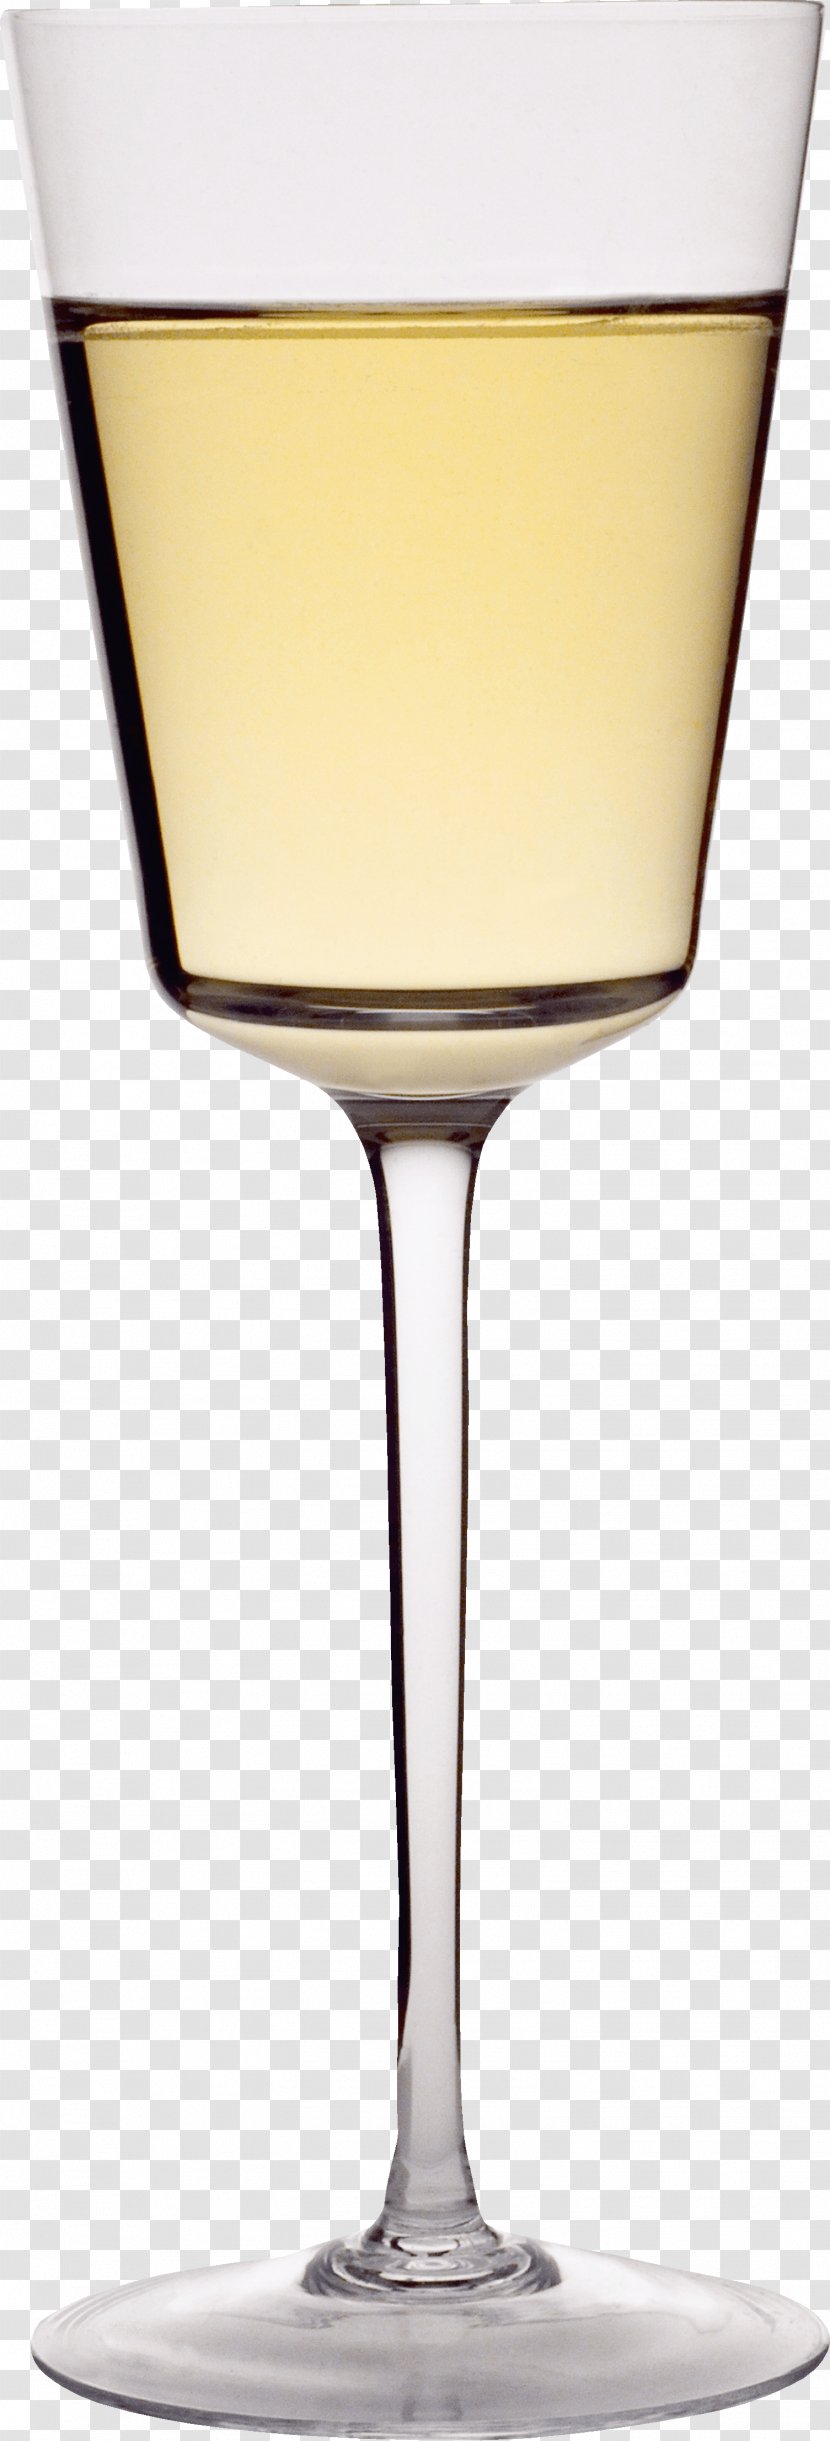 White Wine Cocktail Champagne Martini - Drink - Glass Image Transparent PNG